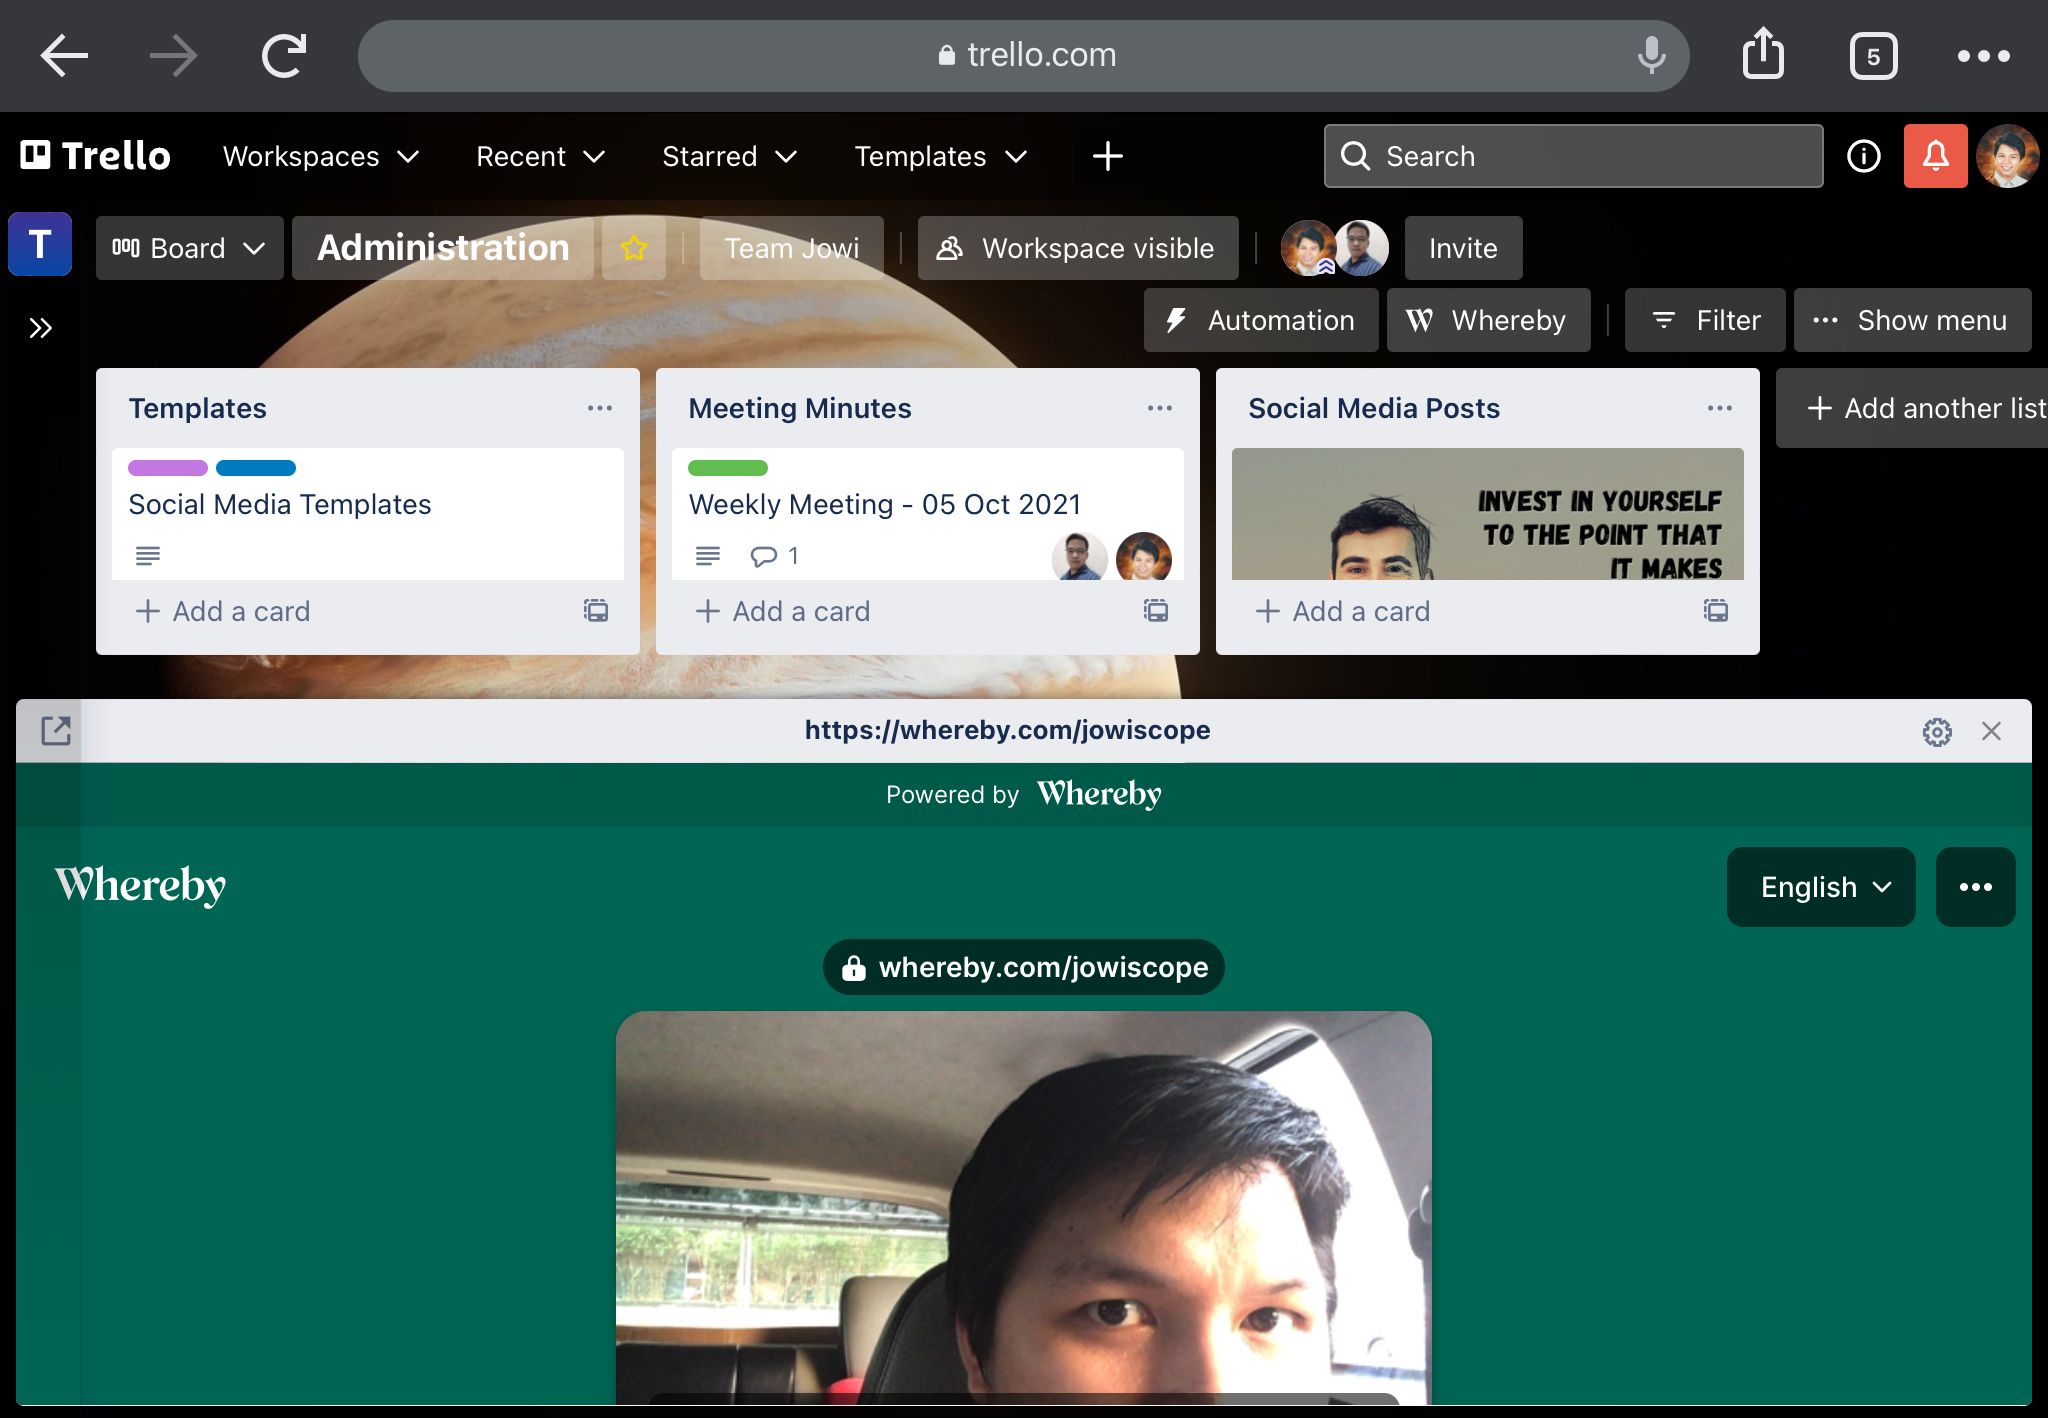 Starting a Whereby virtual office video call directly on Trello